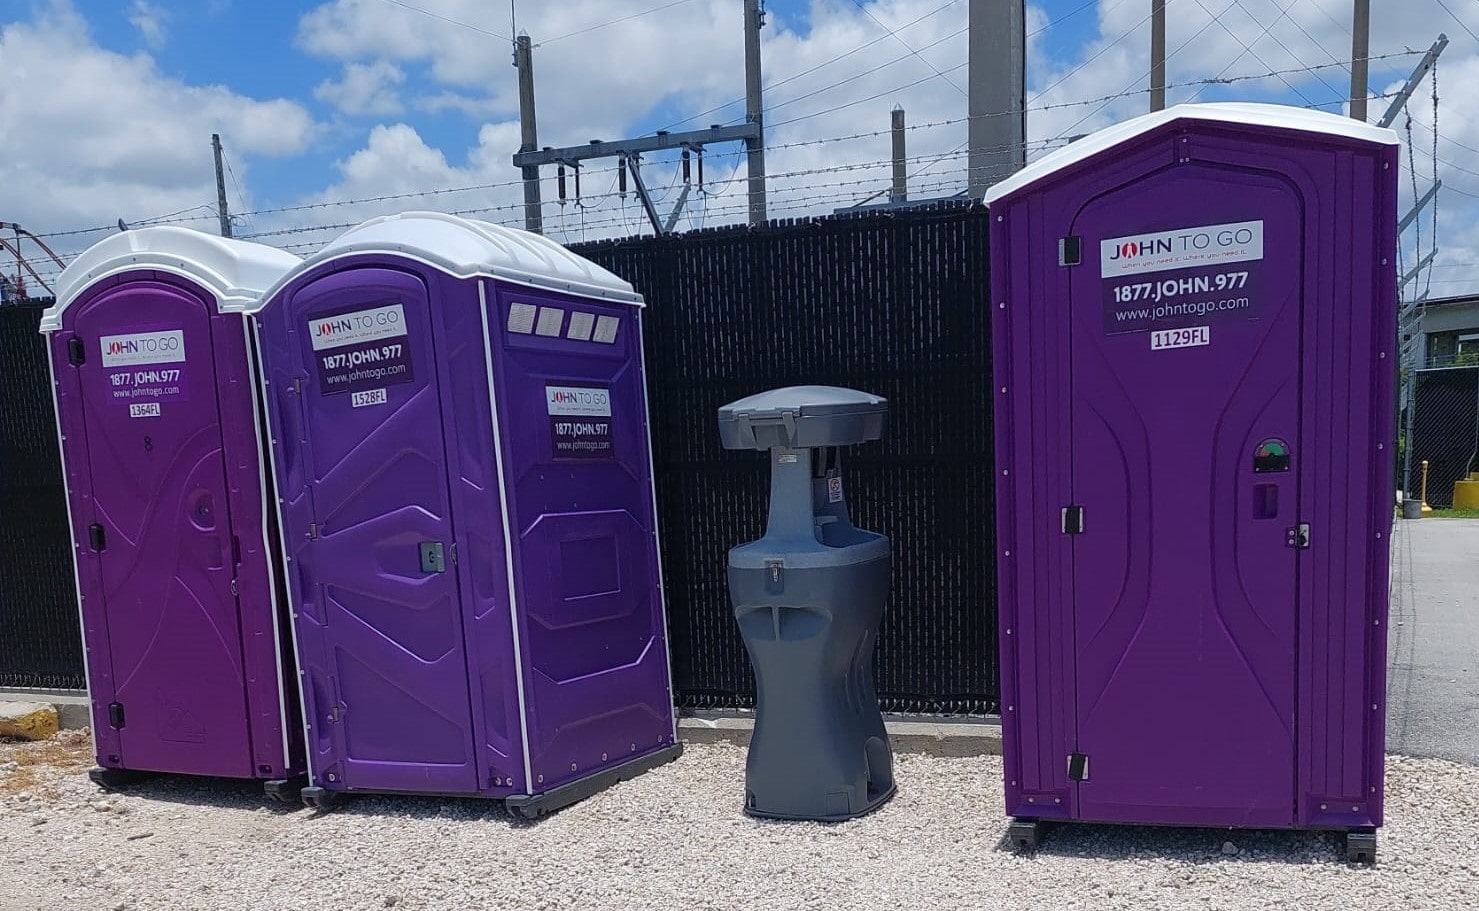 Portable toilet rentals in Water Mill including a handwashing station